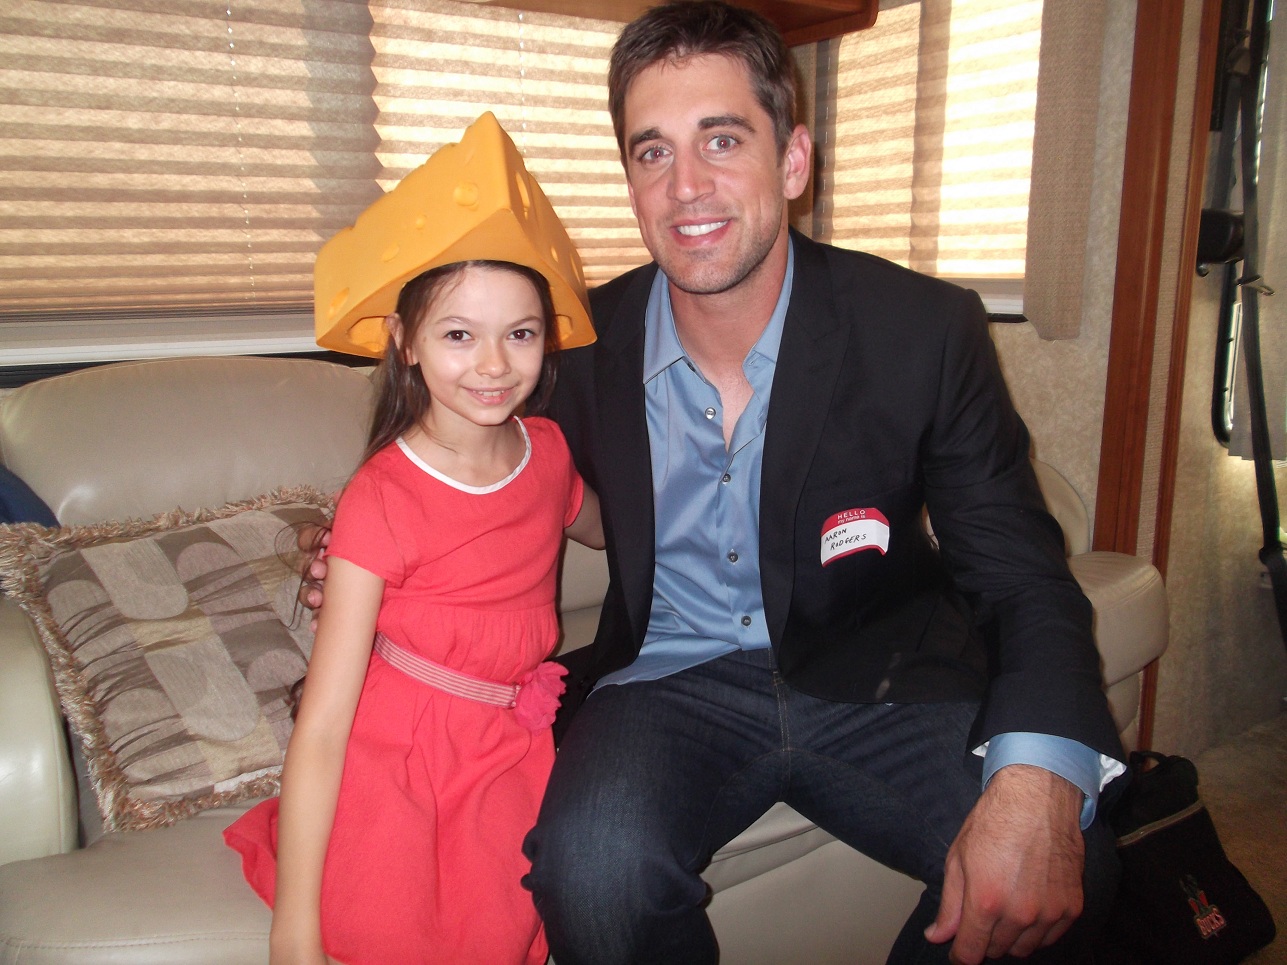 Nikki Hahn and Green Bay Packers Quarter Back, Aaron Rodgers on set of STATE FARM 2012